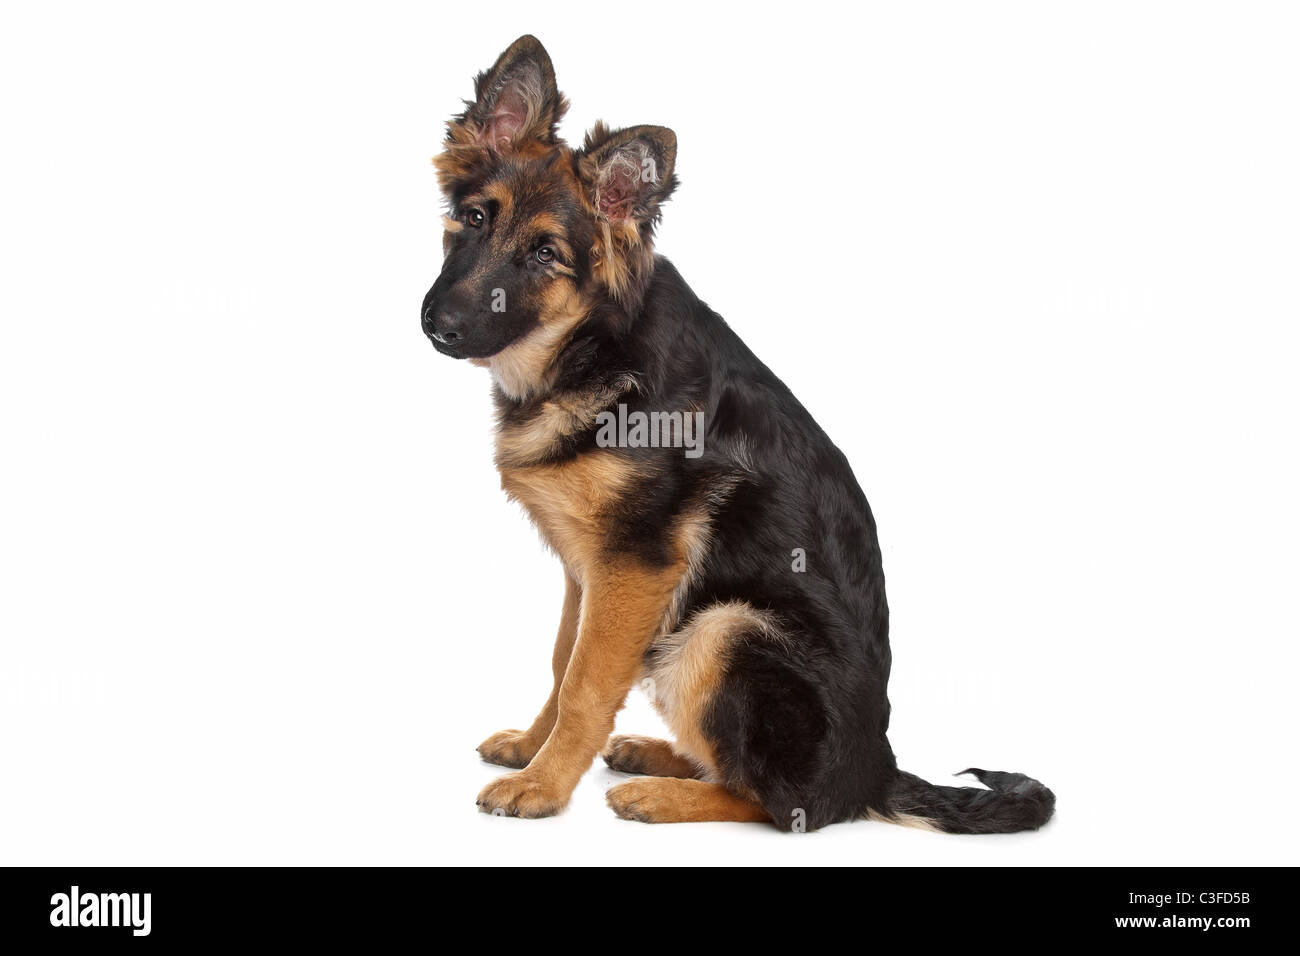 German Shepherd puppy in front of a white background Stock Photo